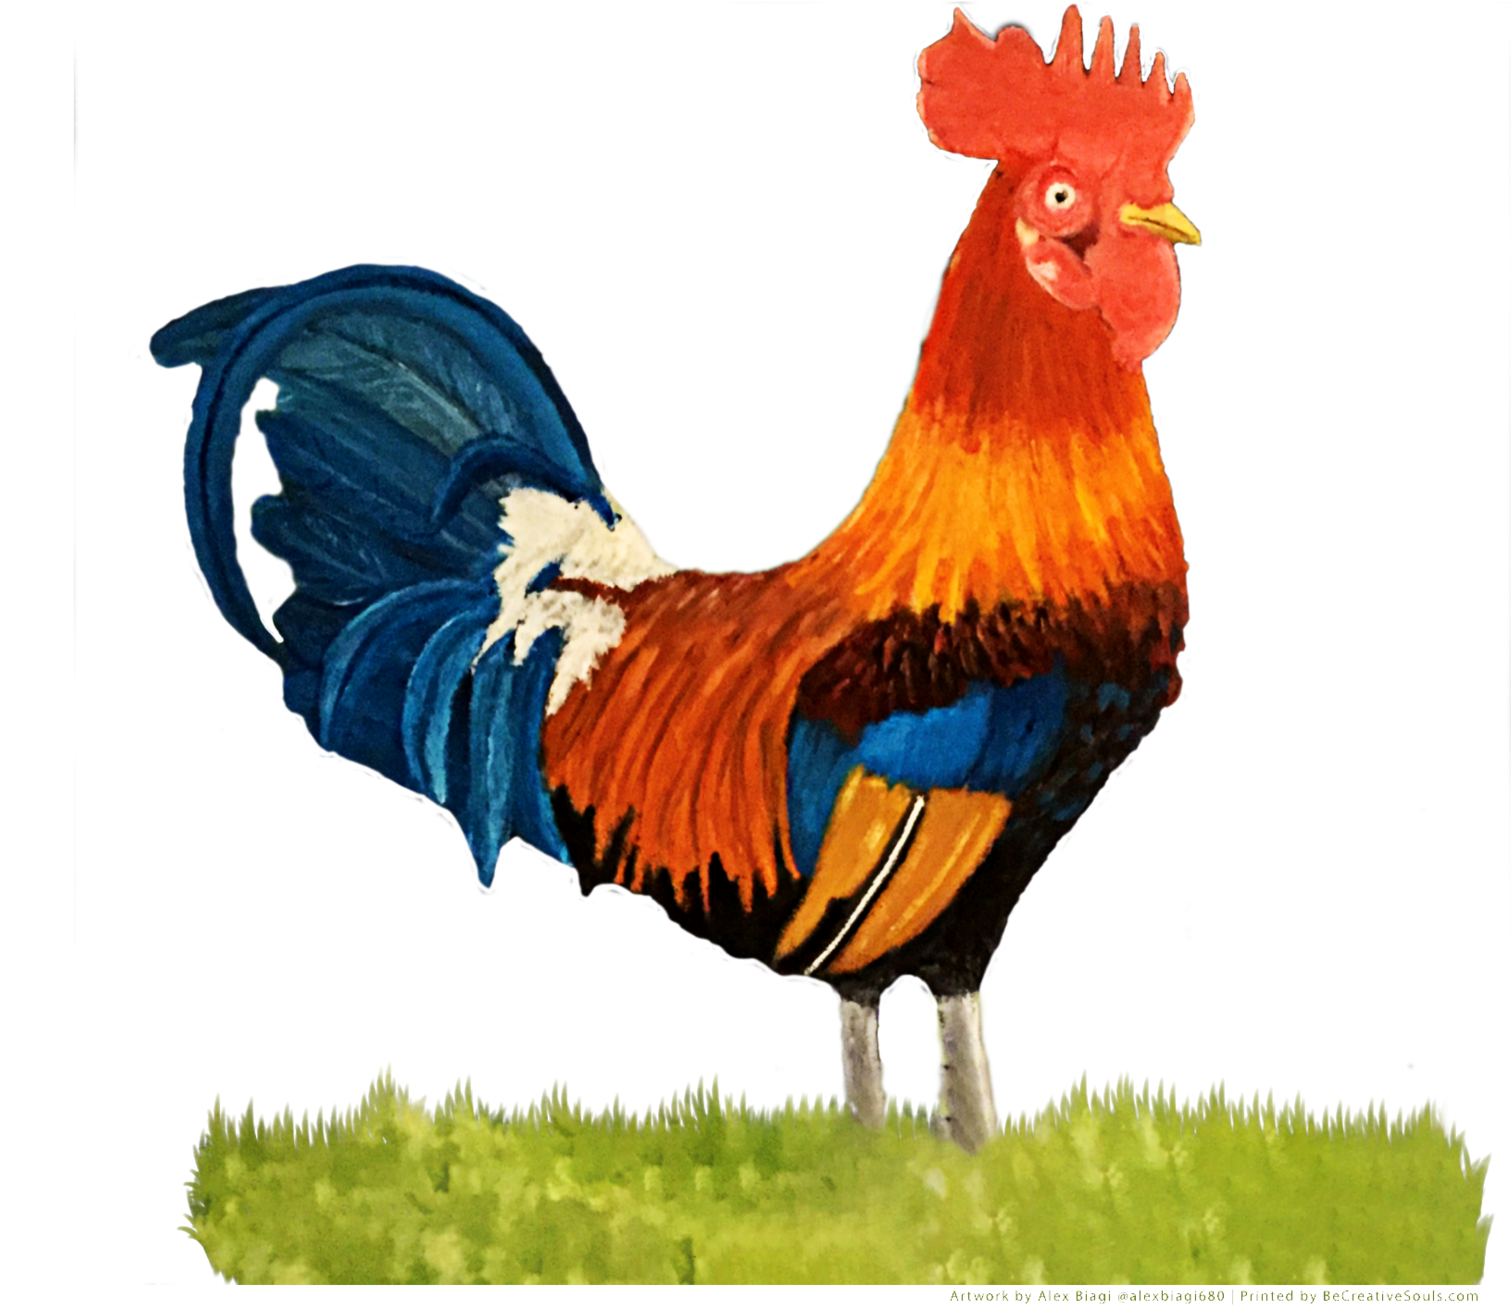 A Rooster Standing On Grass